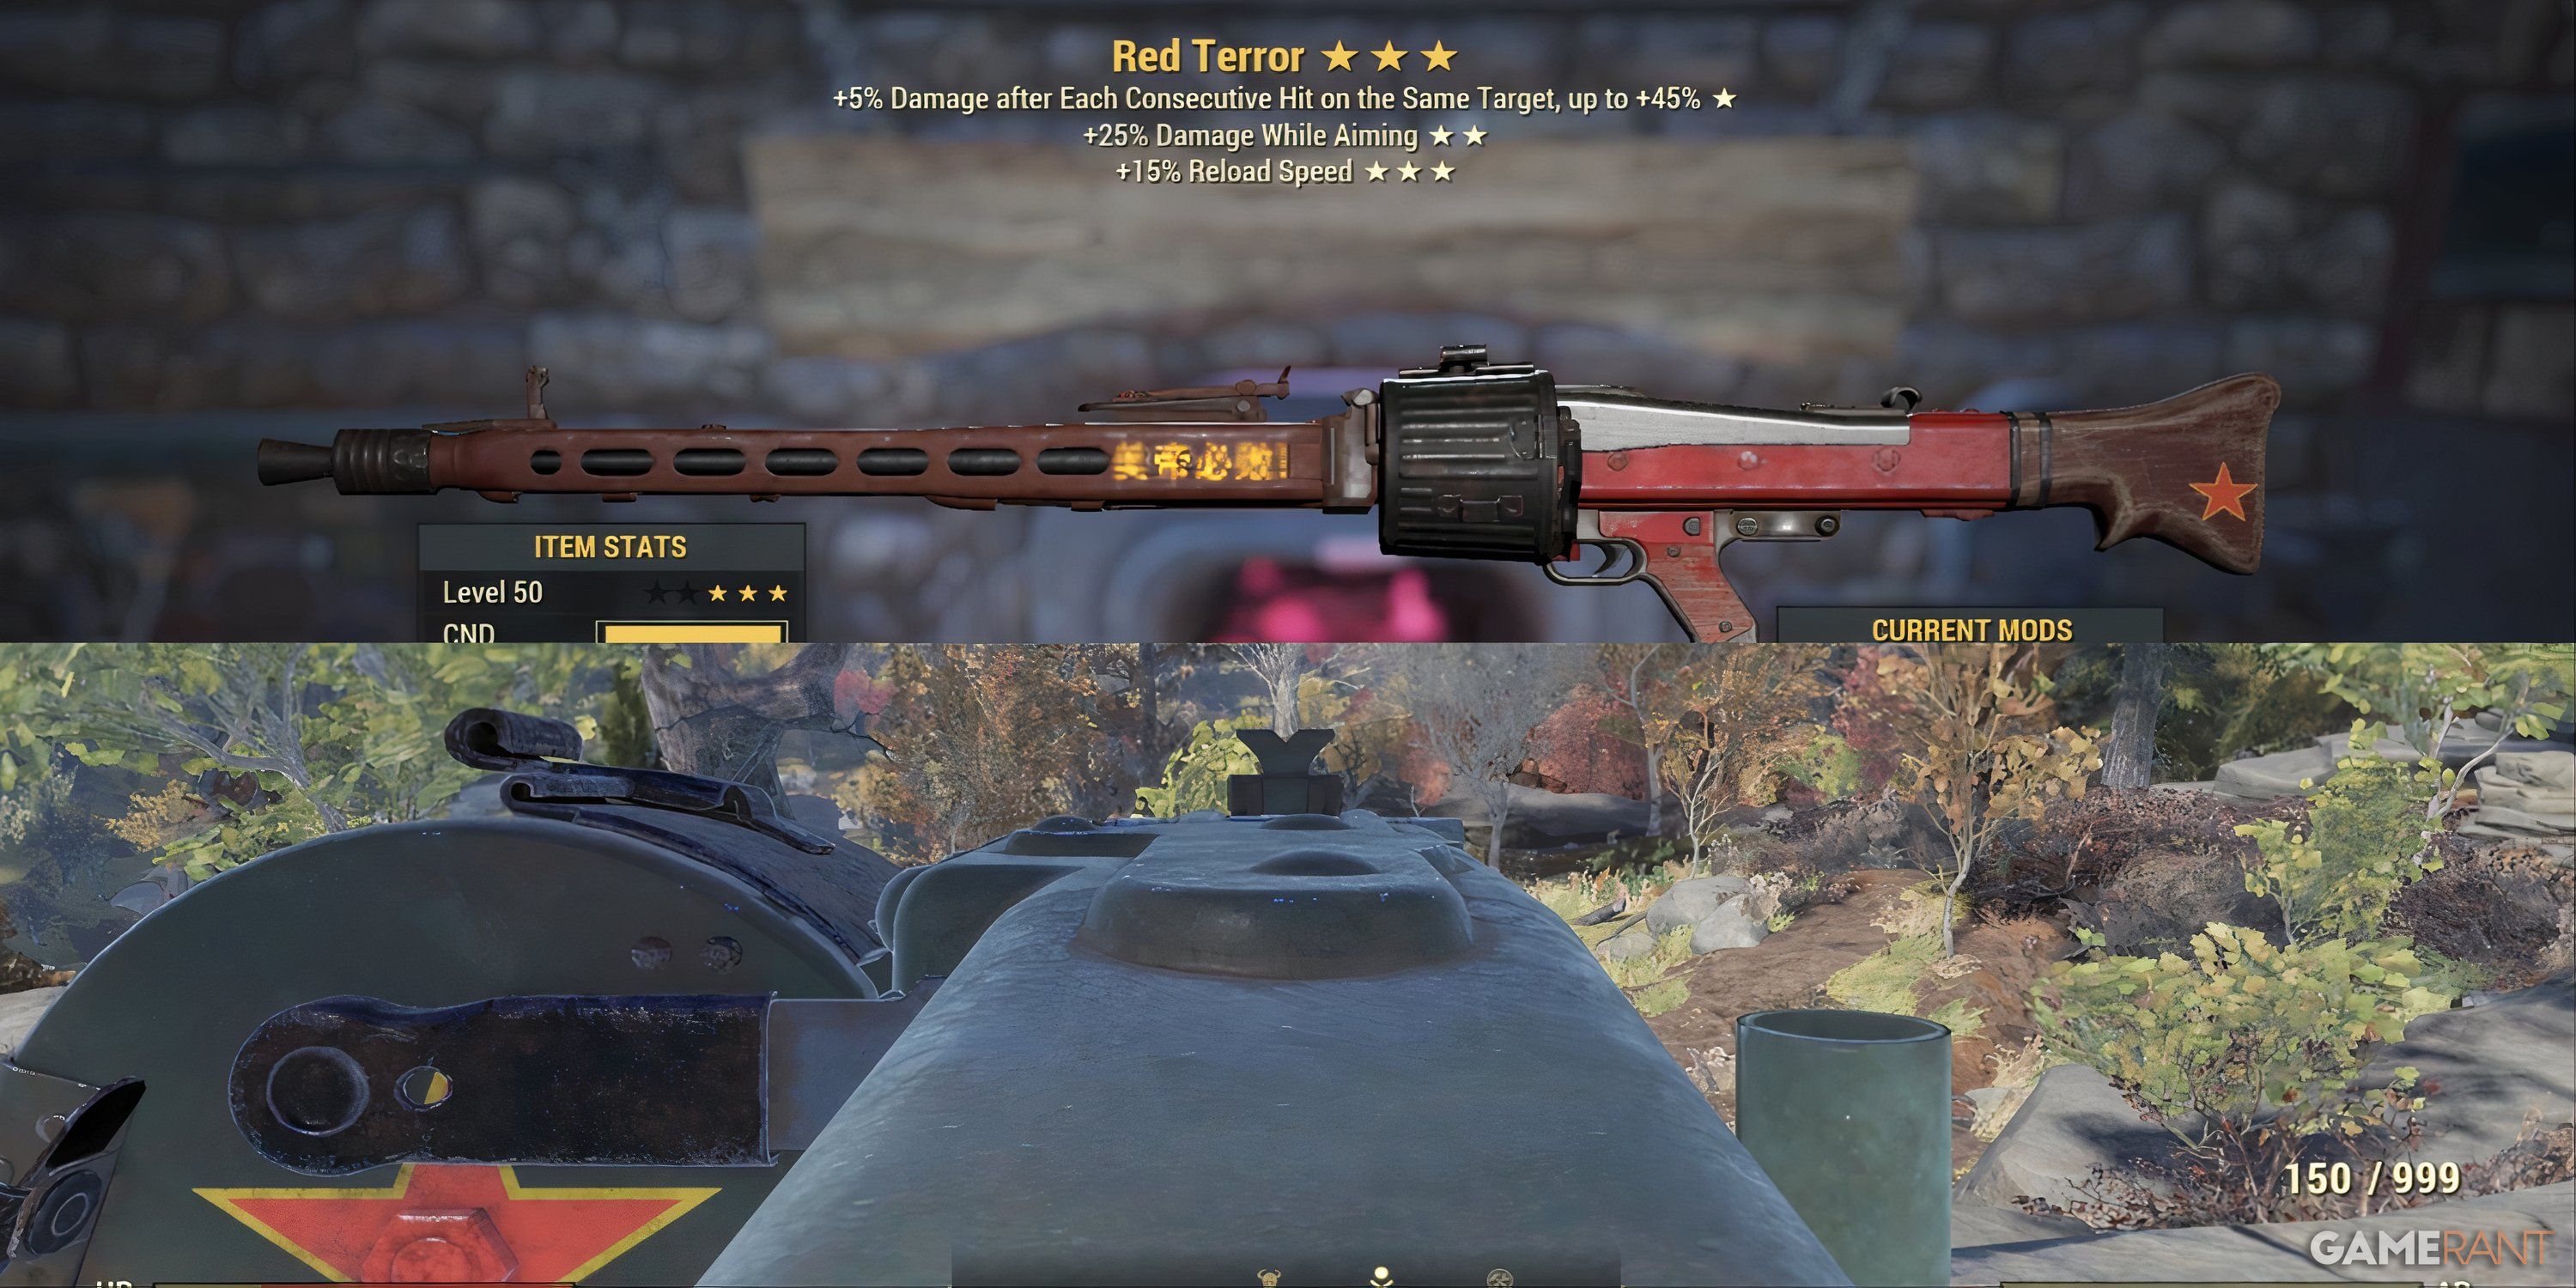 The Red Terror in Fallout 76